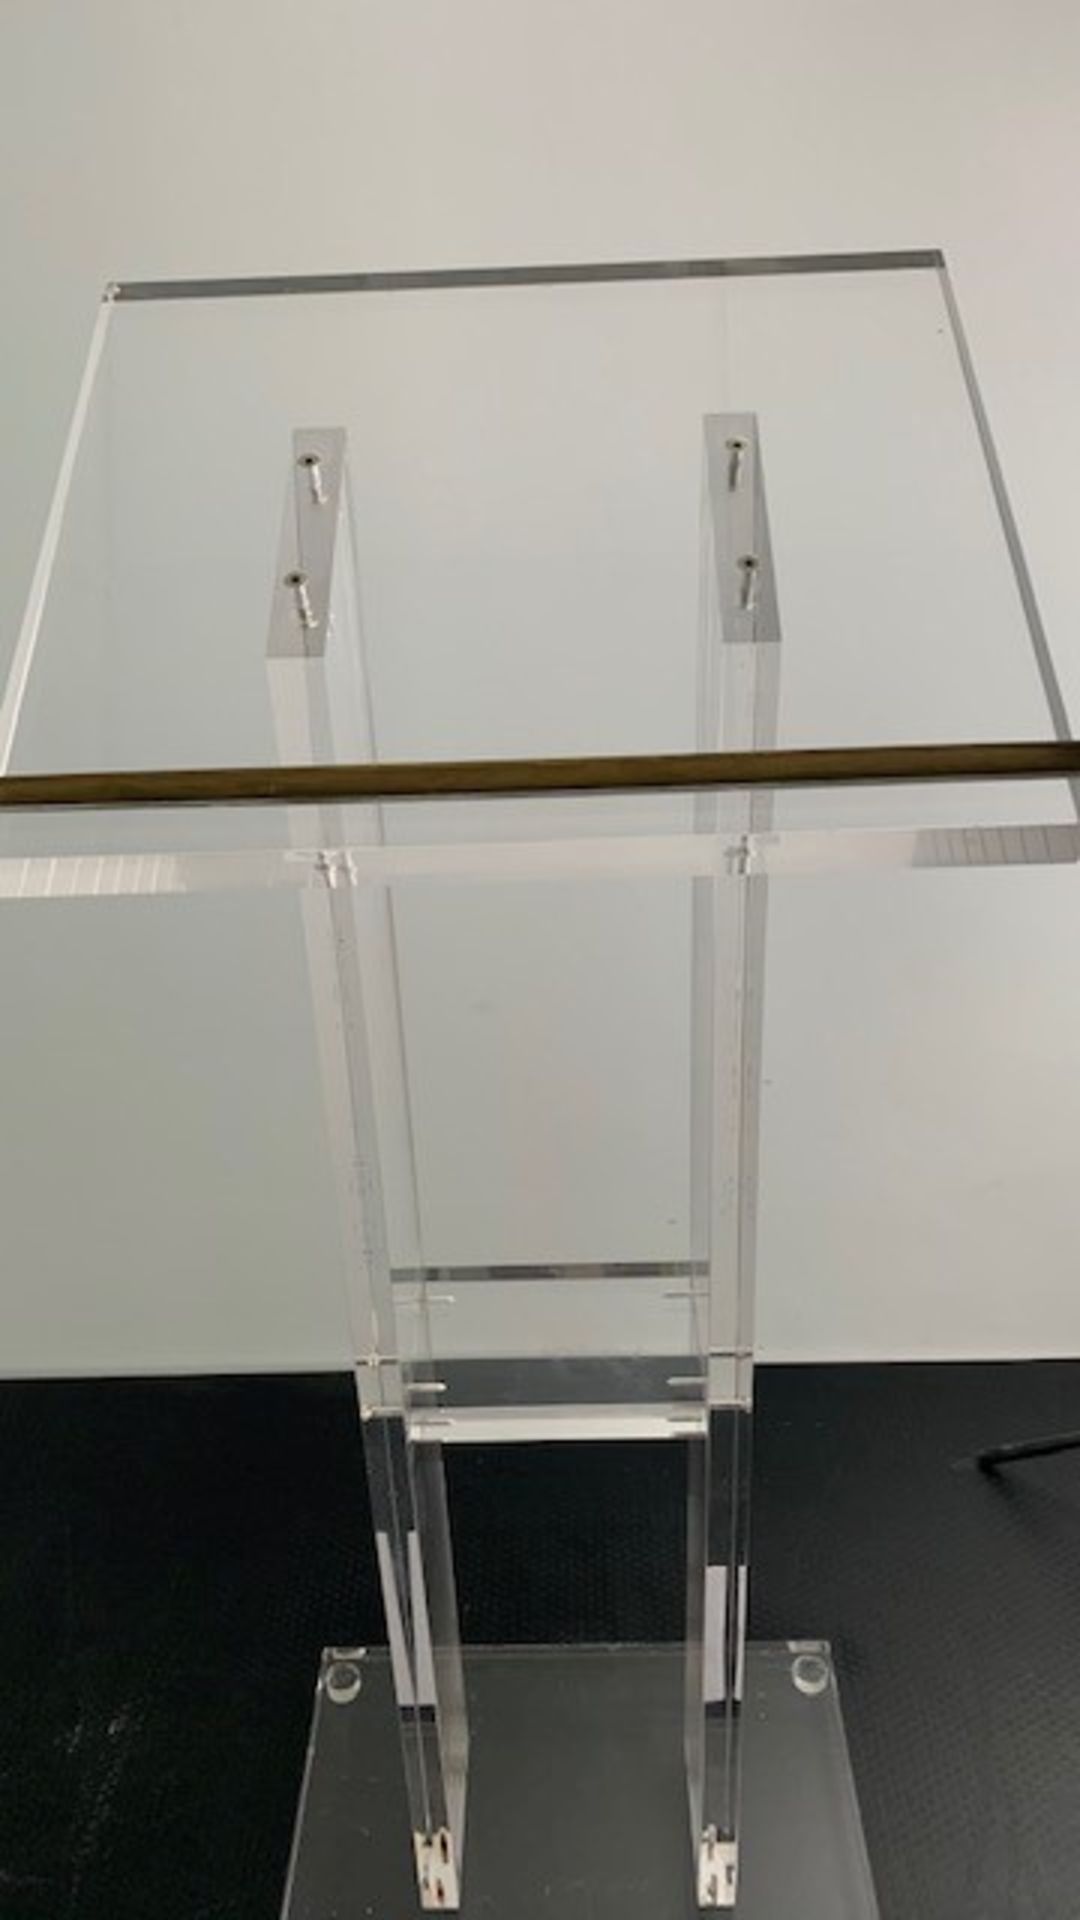 1 x Clear Perspex Lectern Stand With Wheeled Flight Case - Ref: 825 - CL581 - Location: Altrincham - Image 3 of 3